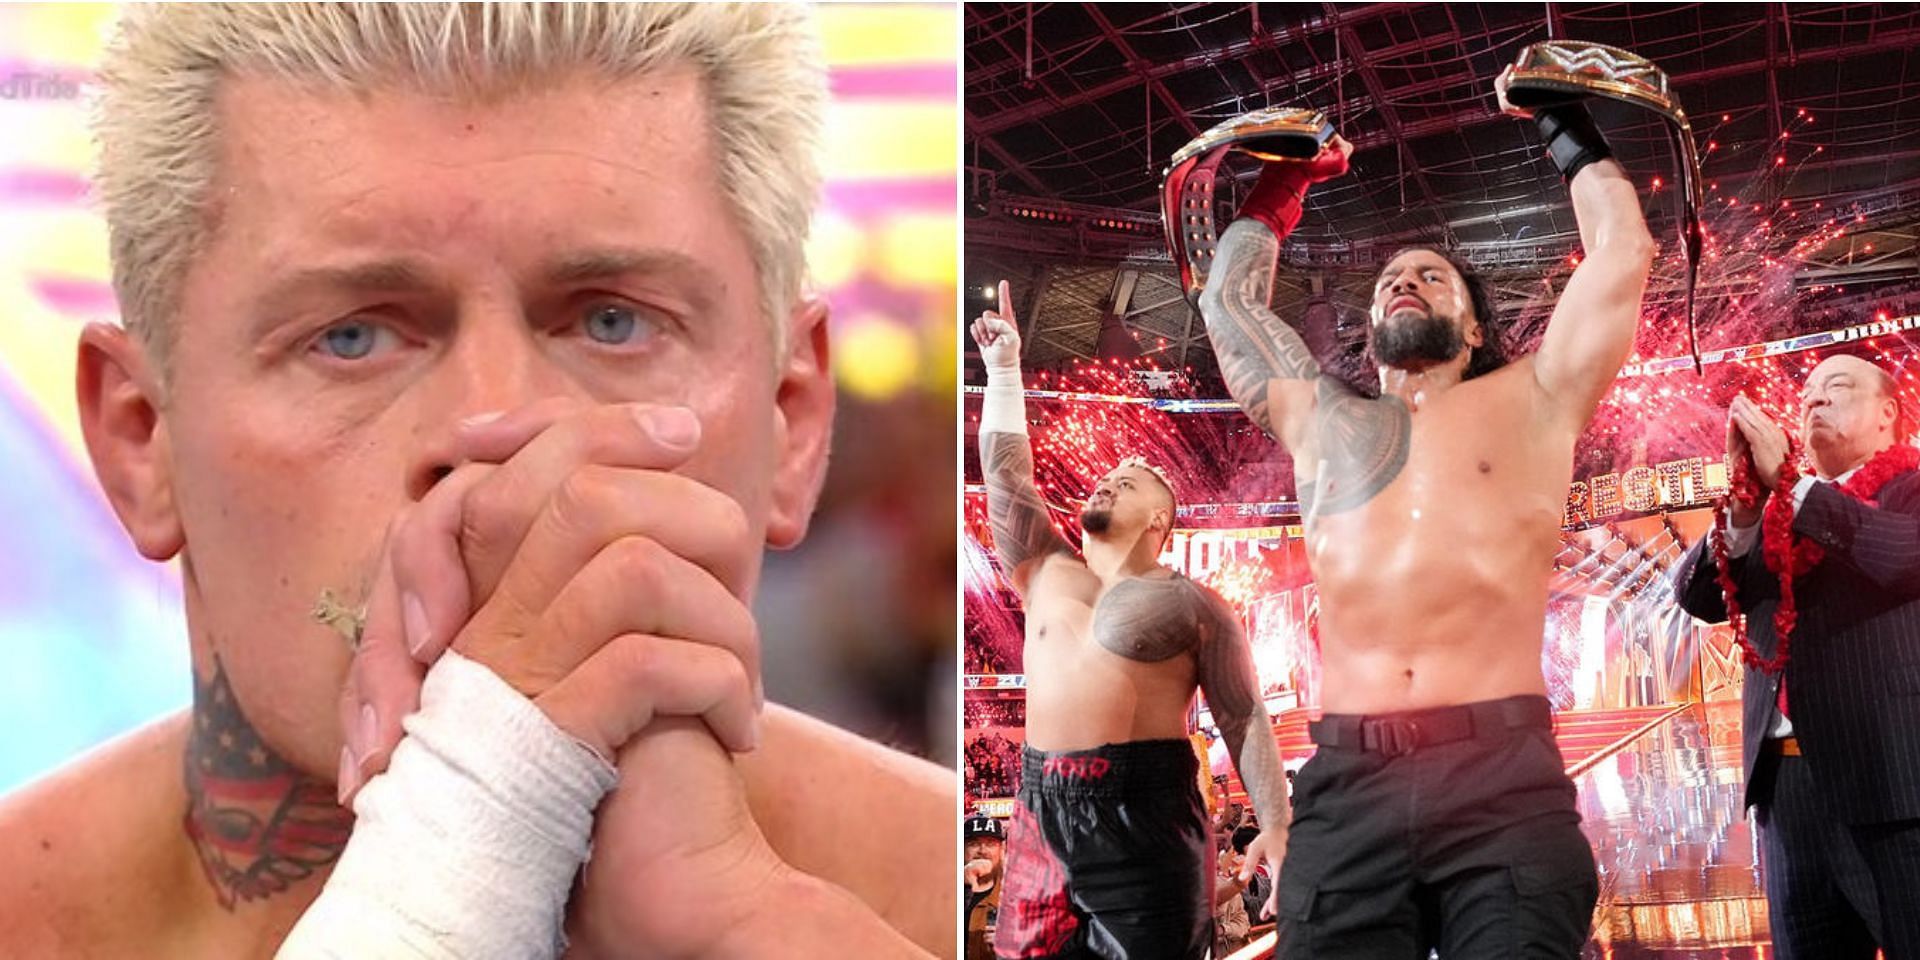 Cody Rhodes lost to Roman Reigns at WrestleMania